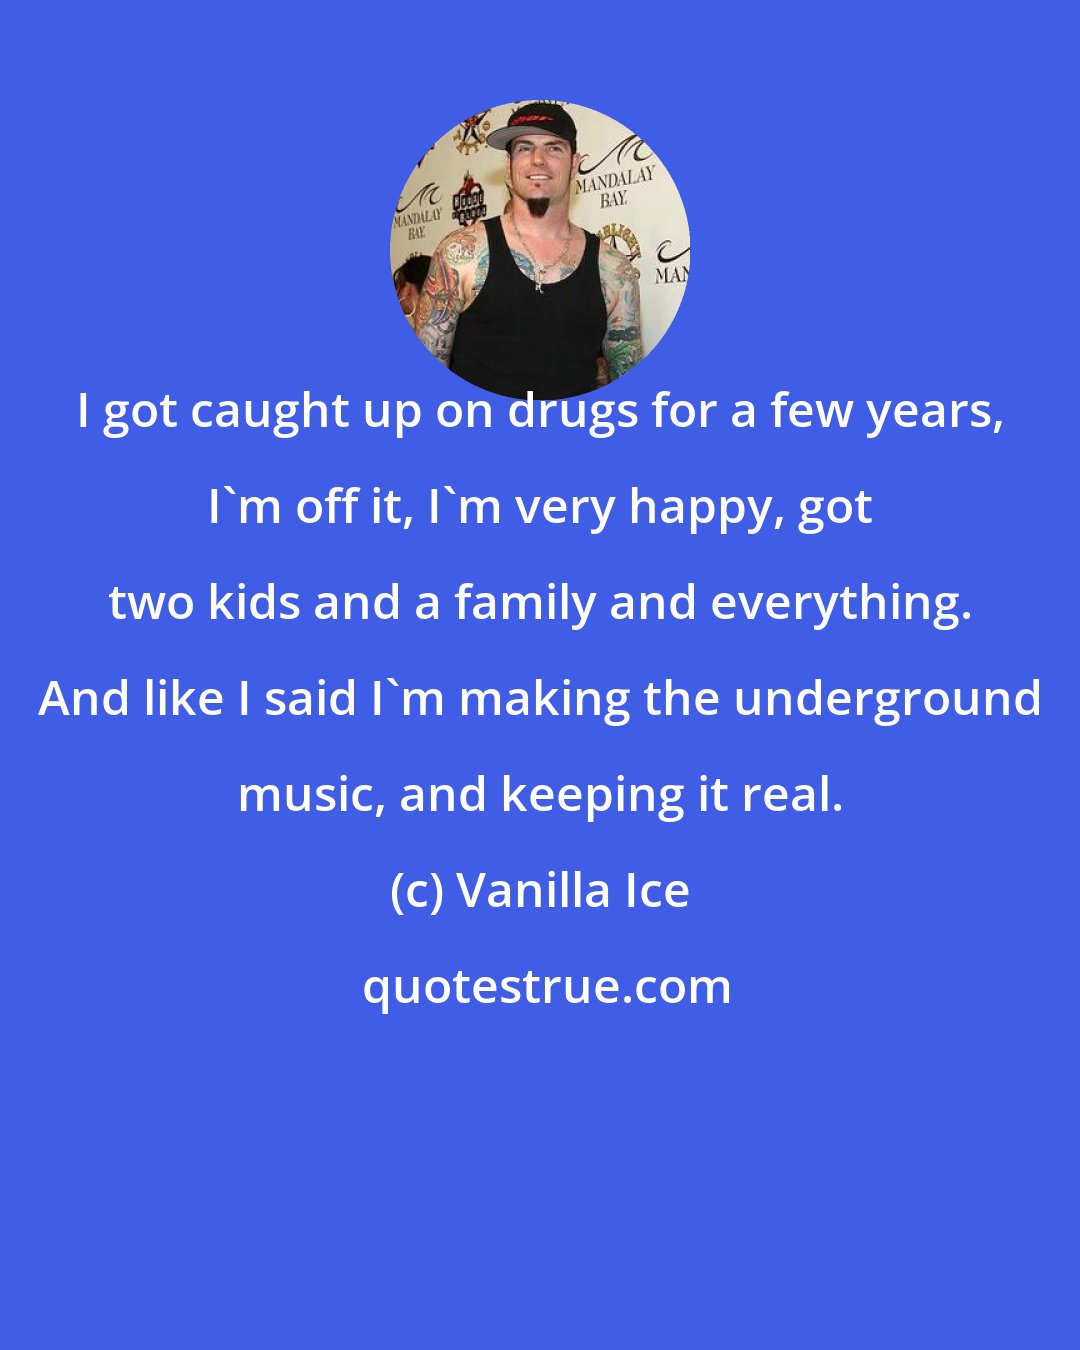 Vanilla Ice: I got caught up on drugs for a few years, I'm off it, I'm very happy, got two kids and a family and everything. And like I said I'm making the underground music, and keeping it real.